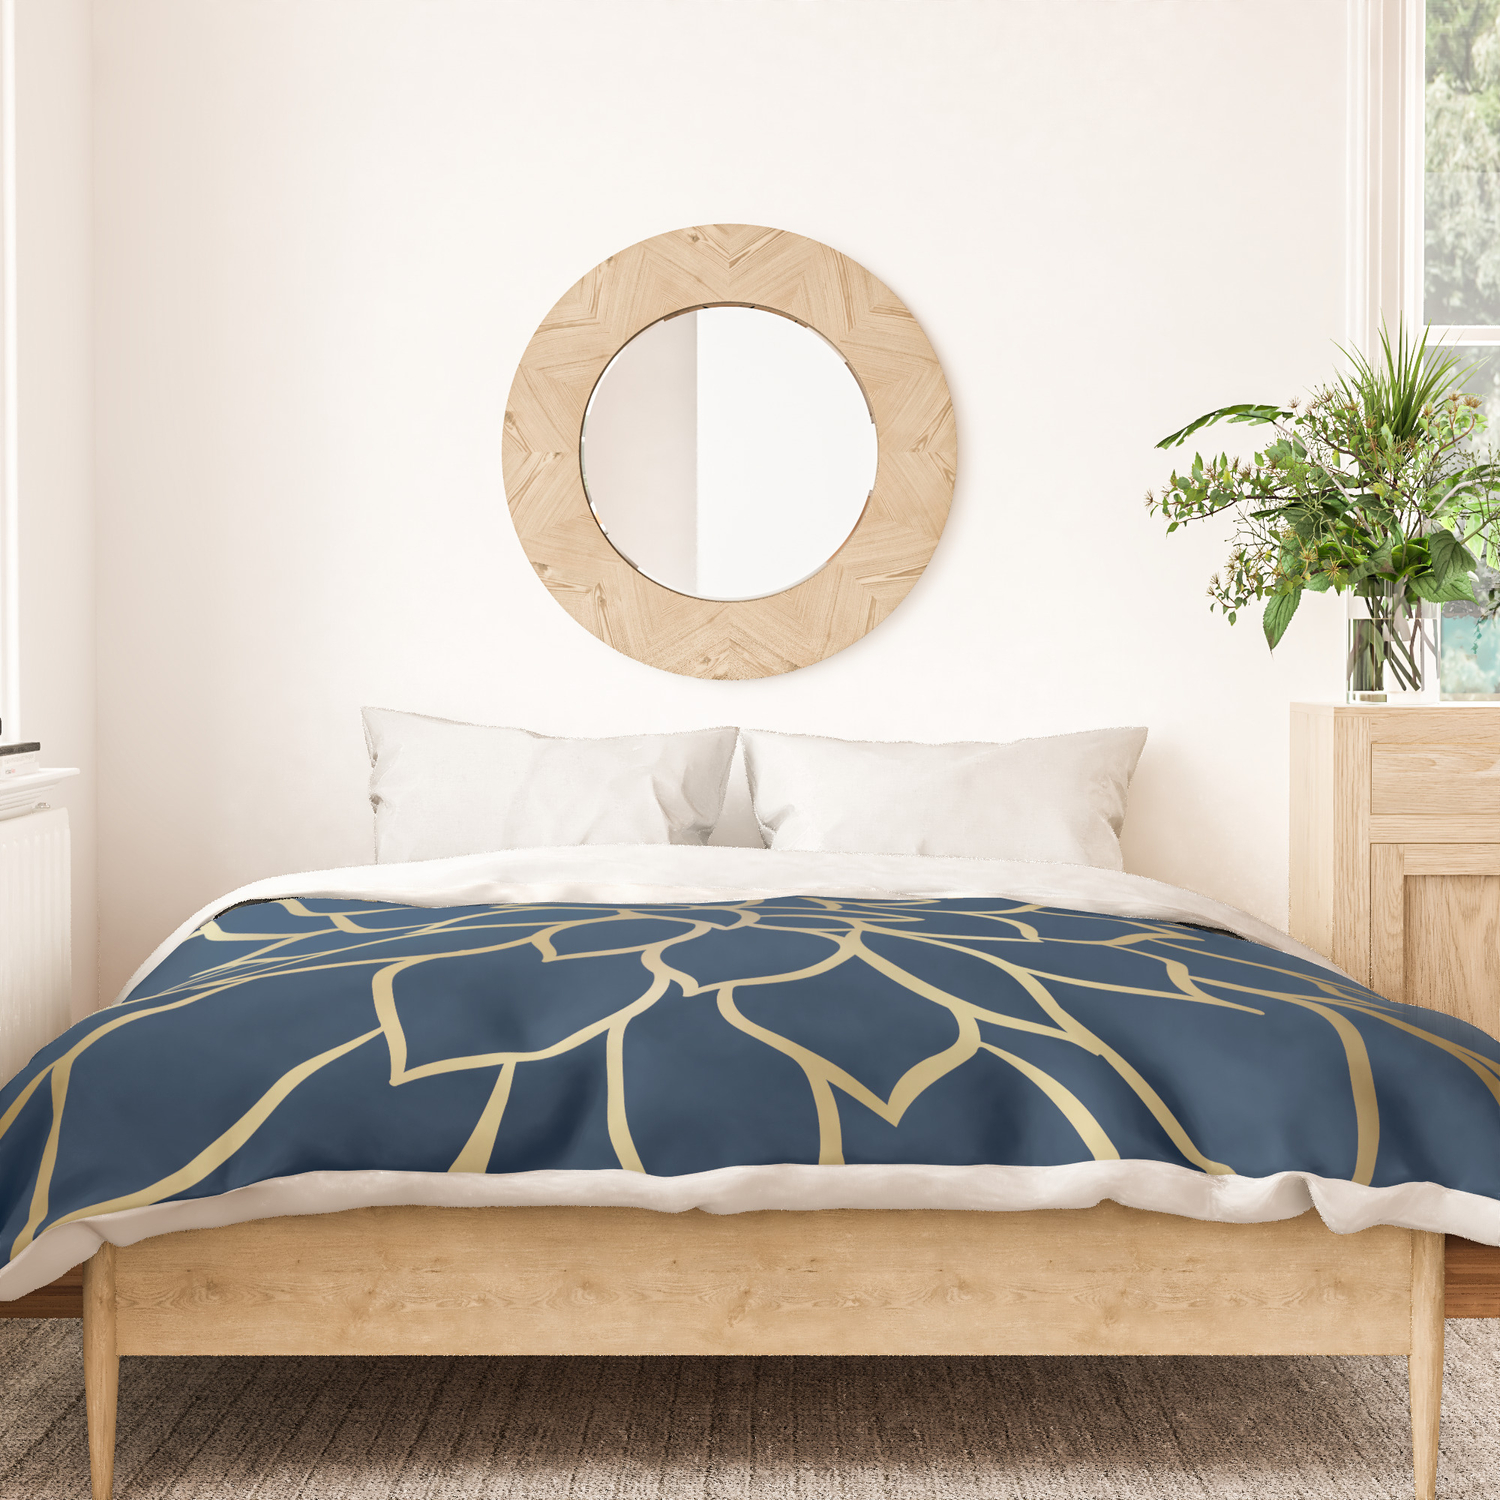 Navy Blue and Gold by Megan Morris on Synthetic Duvet Covers Line Art Floral Prints